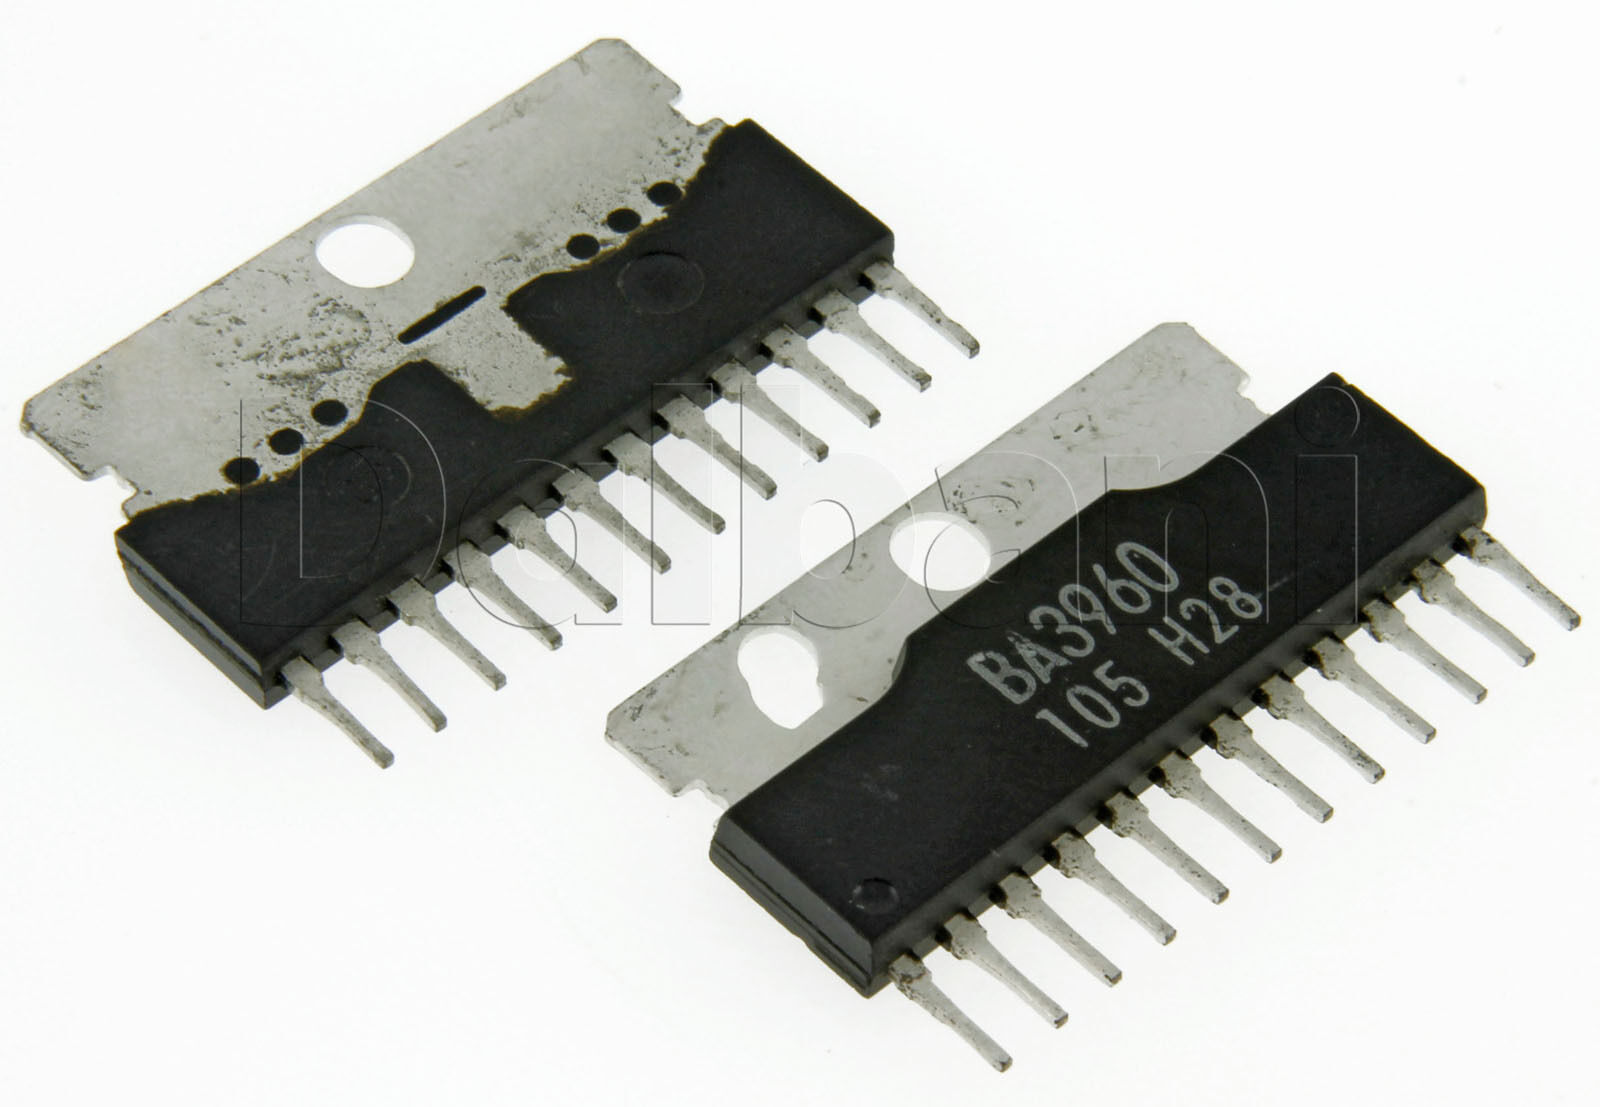 BA3960 Original Pulled Rohm Integrated Circuit for sale online